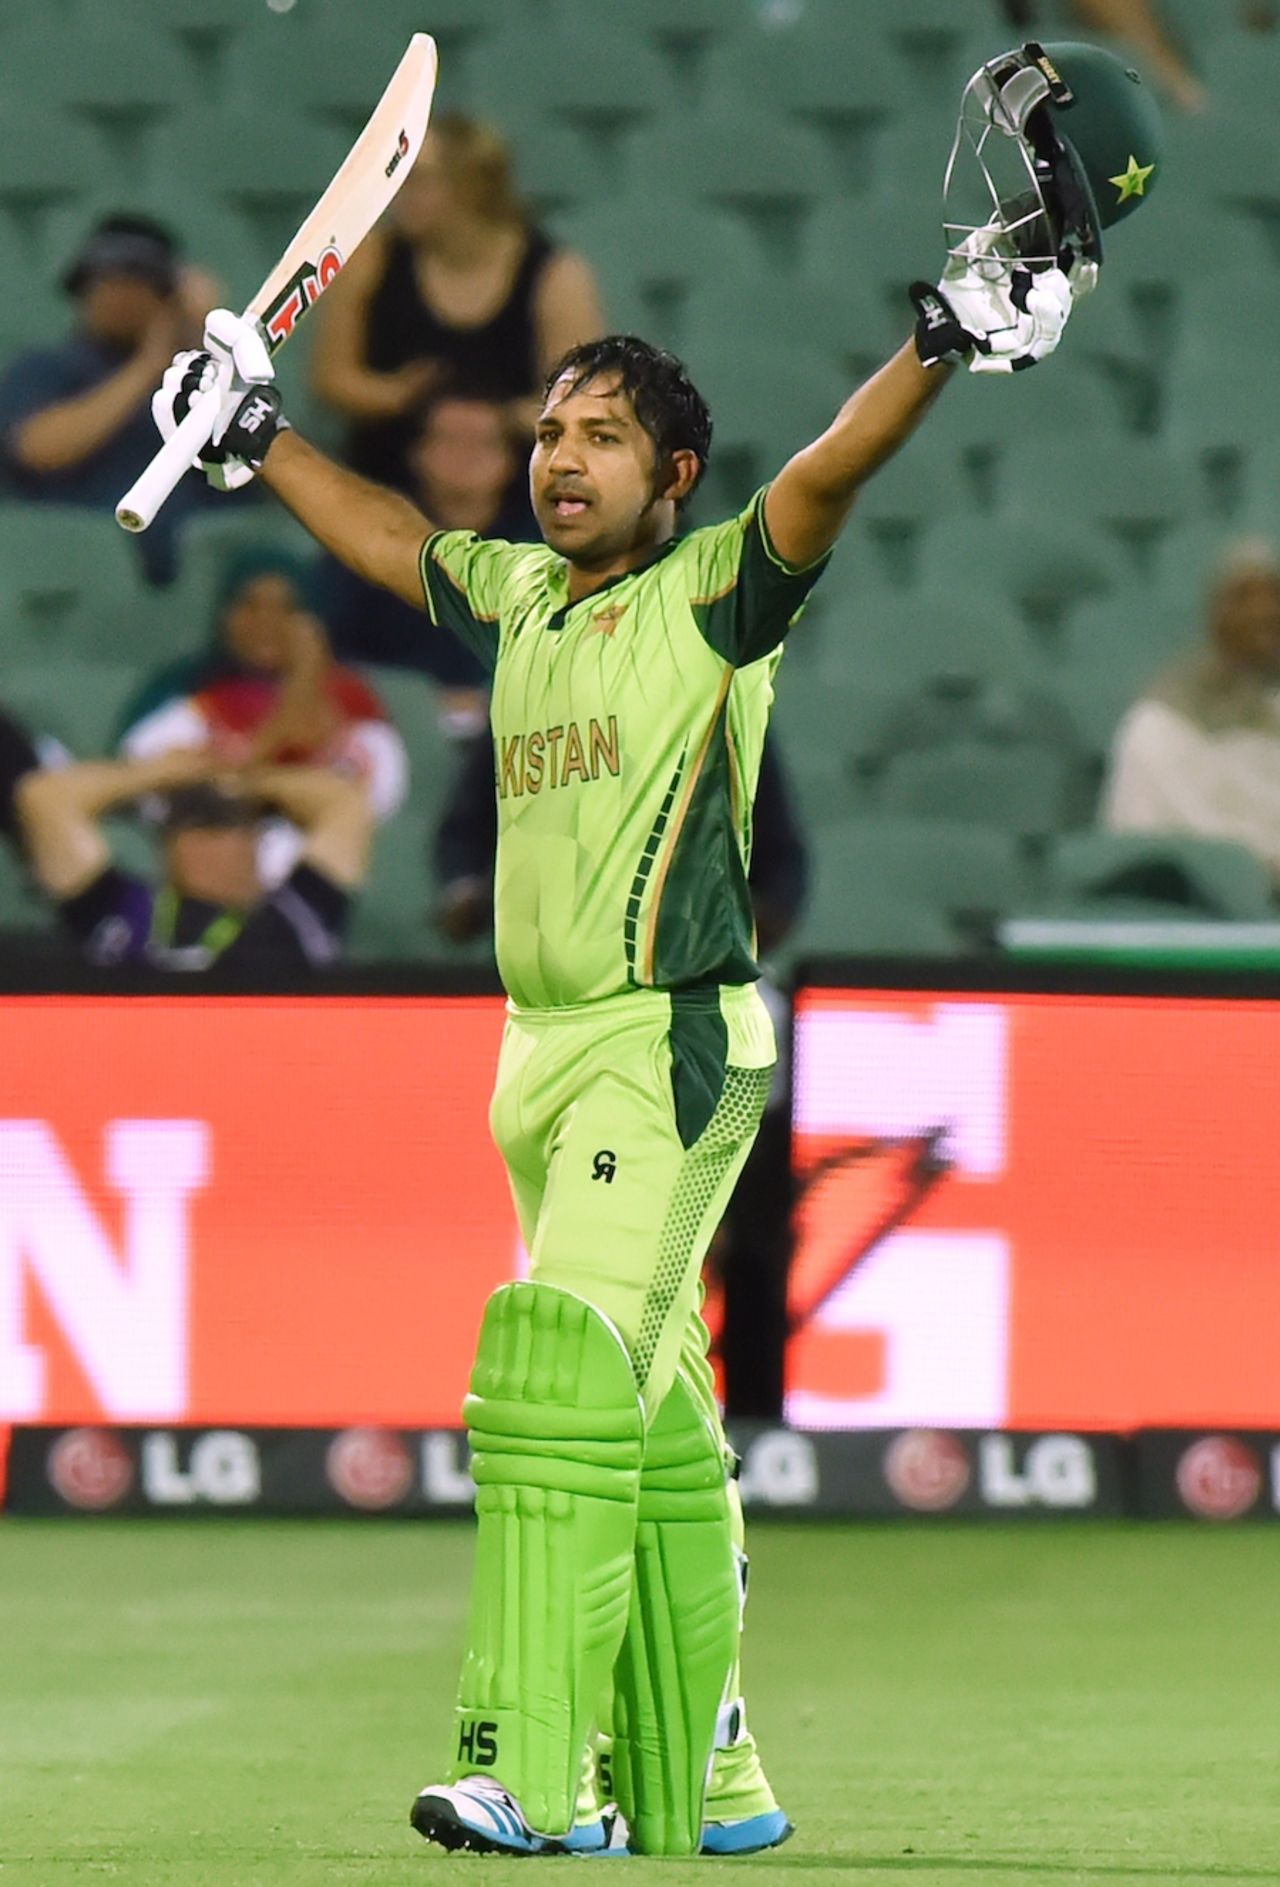 Sarfraz Ahmed acknowledges the crowd after his maiden ODI hundred, Ireland v Pakistan, World Cup 2015, Group B, Adelaide, March 15, 2015